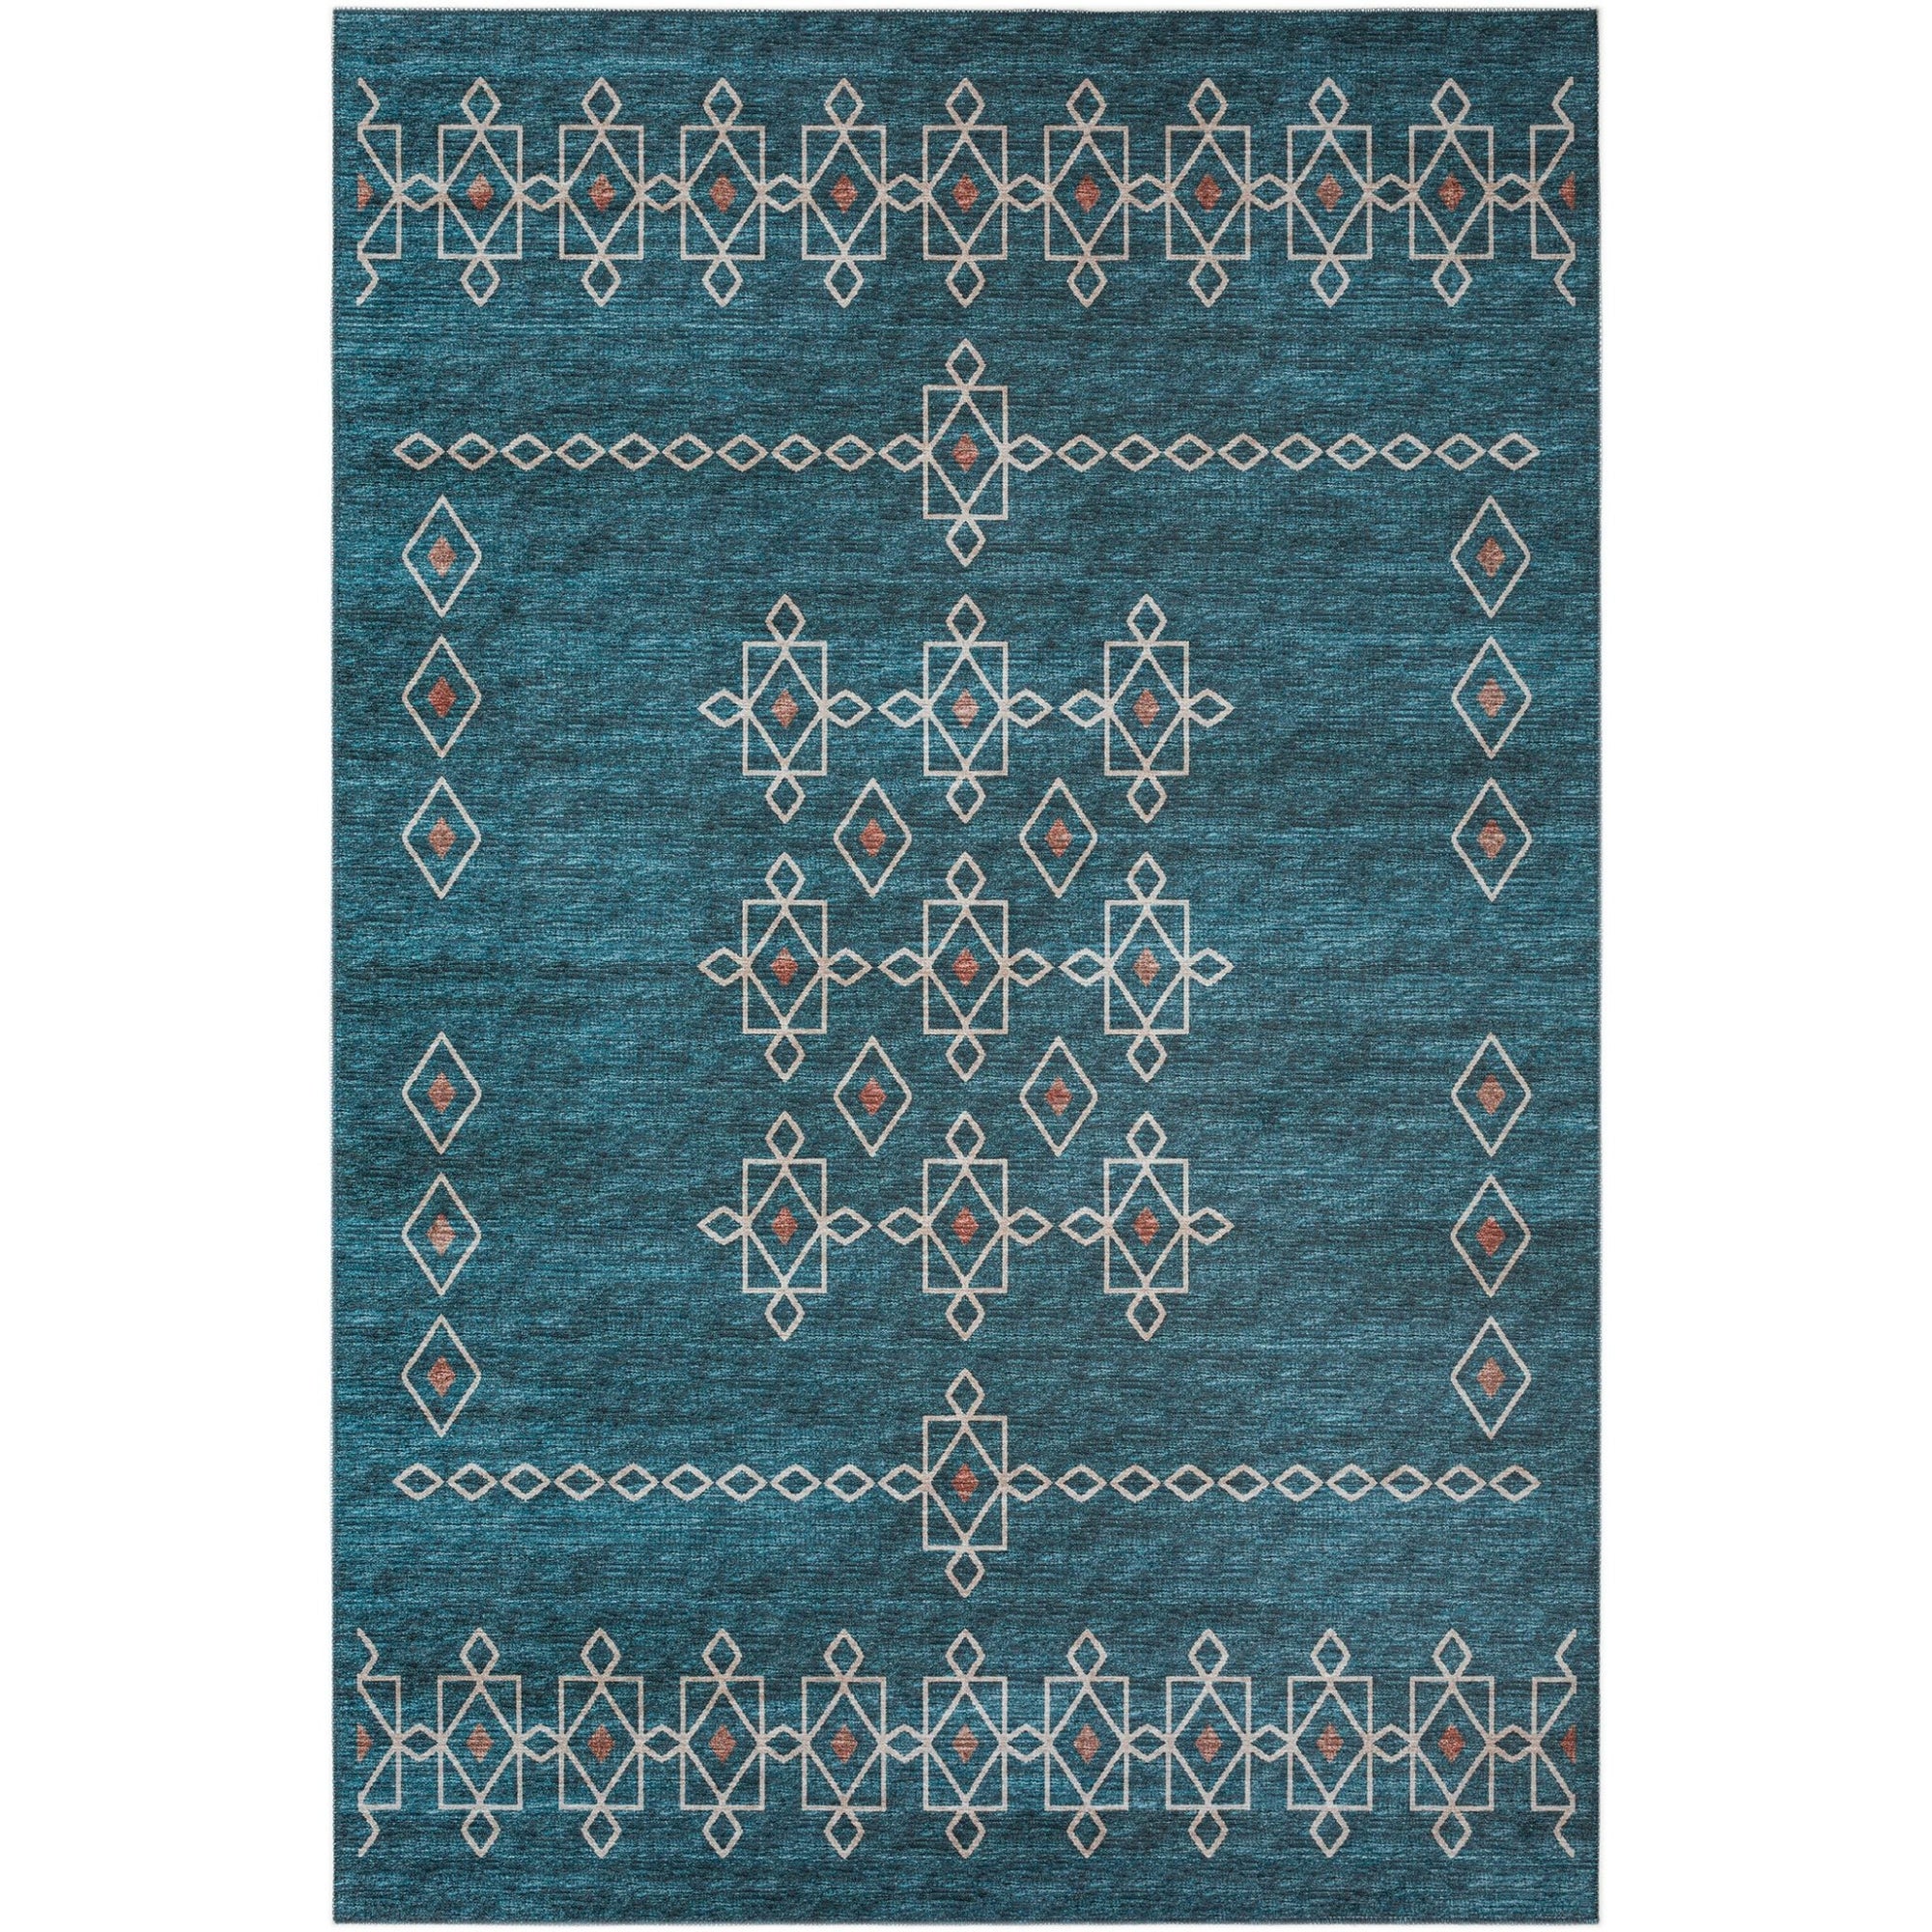 [Style] Tribal Rugs